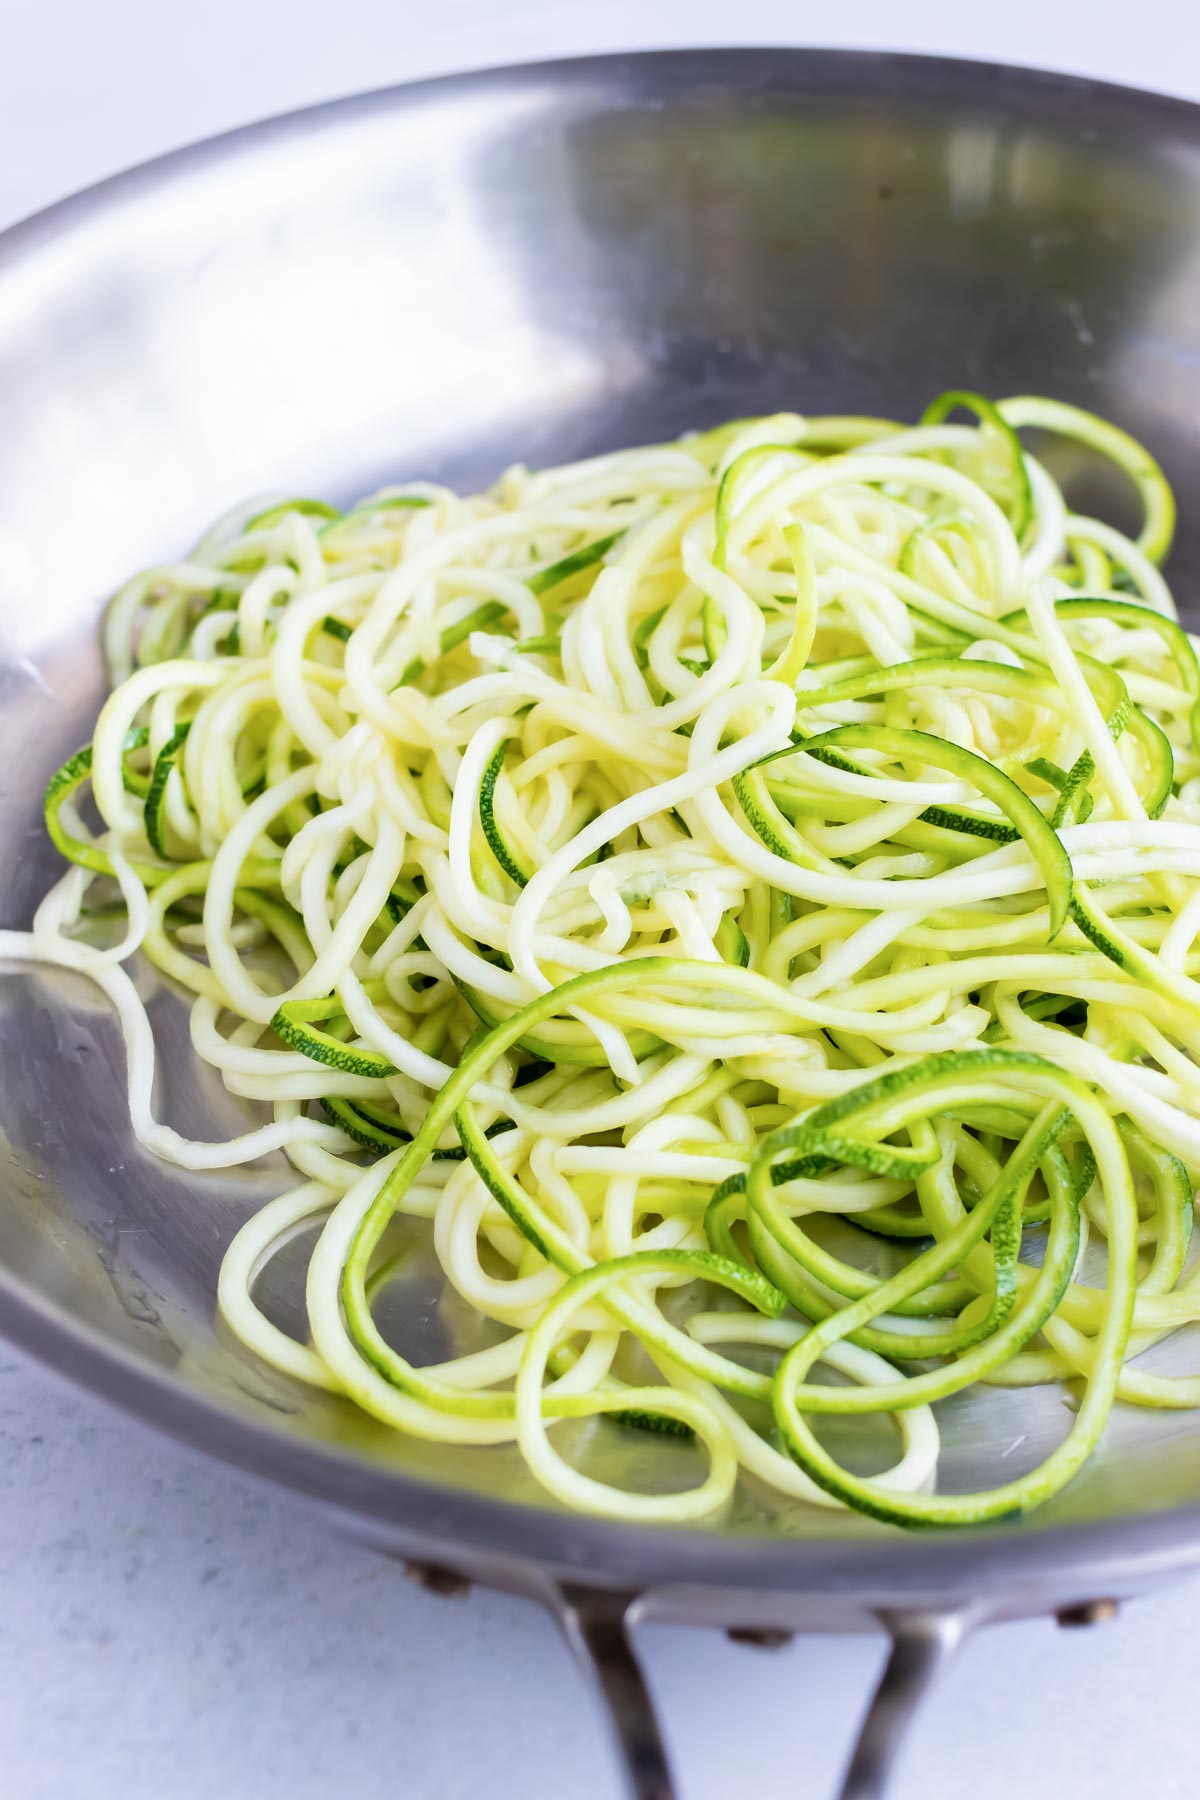 Zoodles in a skillet to cook on the stovetop.